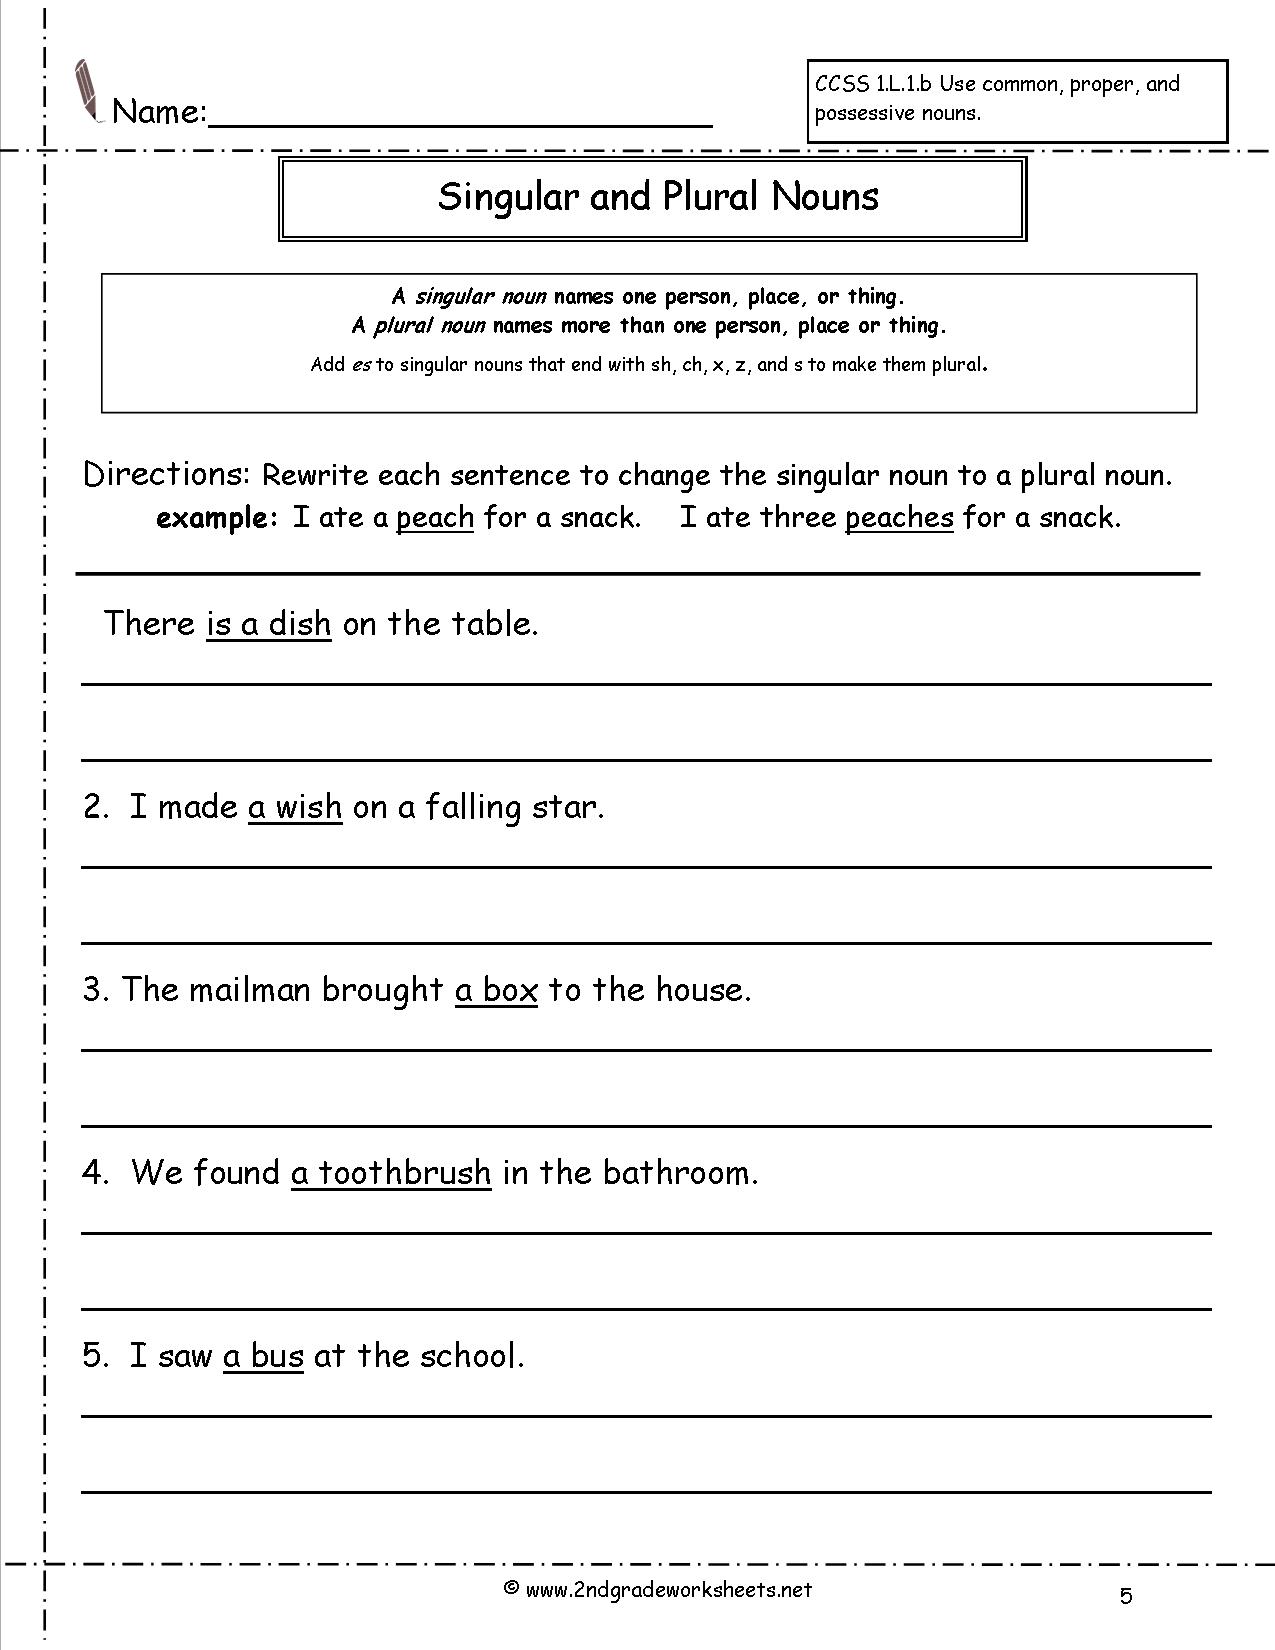 11-best-images-of-change-y-to-i-worksheet-for-specific-heat-worksheet-physics-singular-and